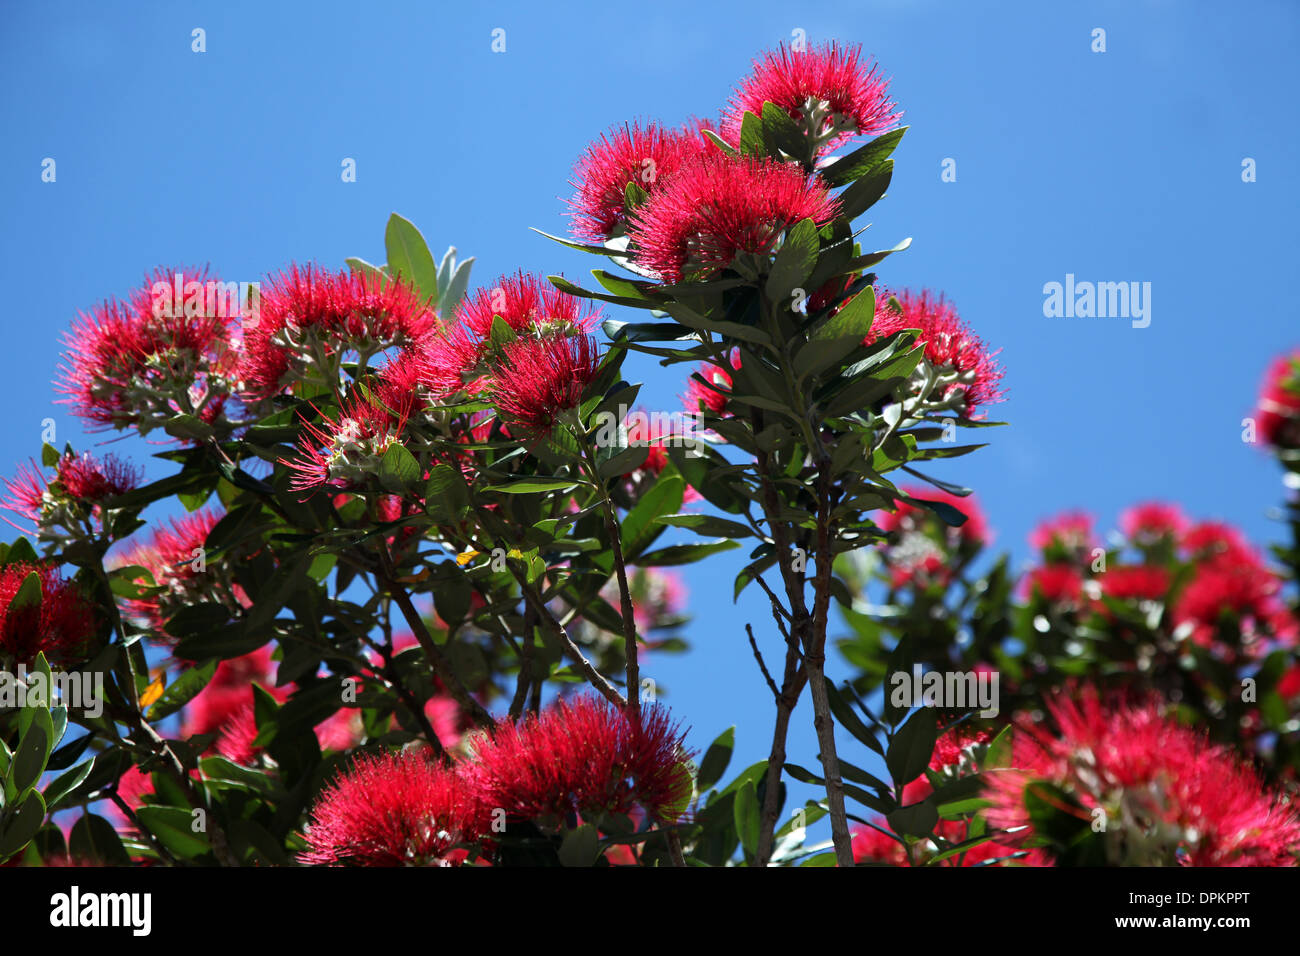 This tree and blossom is eagerly awaited in New Zealand where it blooms at Christmas. Here the scarlet blooms contrast with the Stock Photo